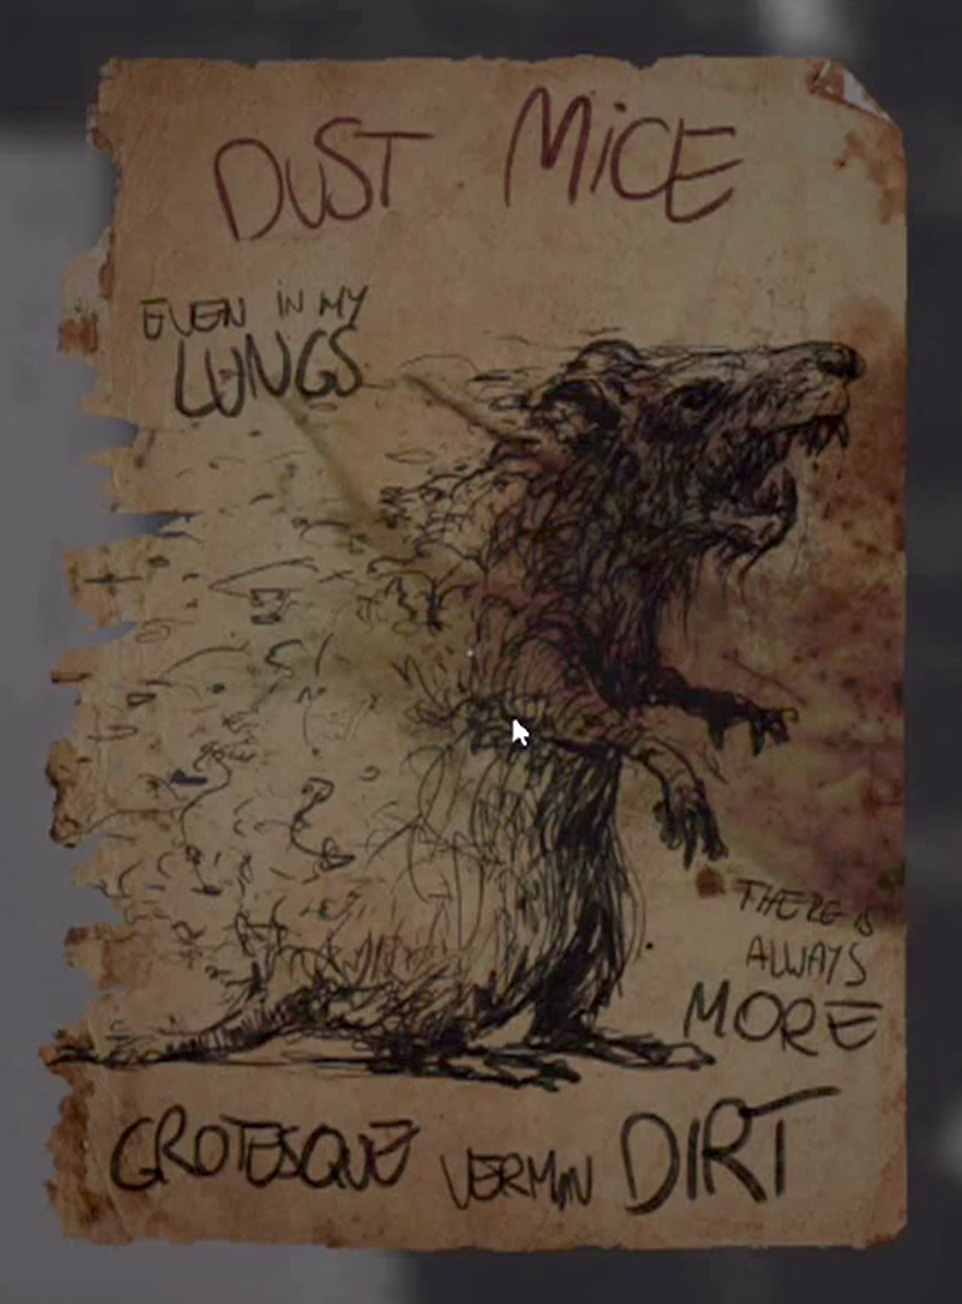 layers of fear cat dog rat